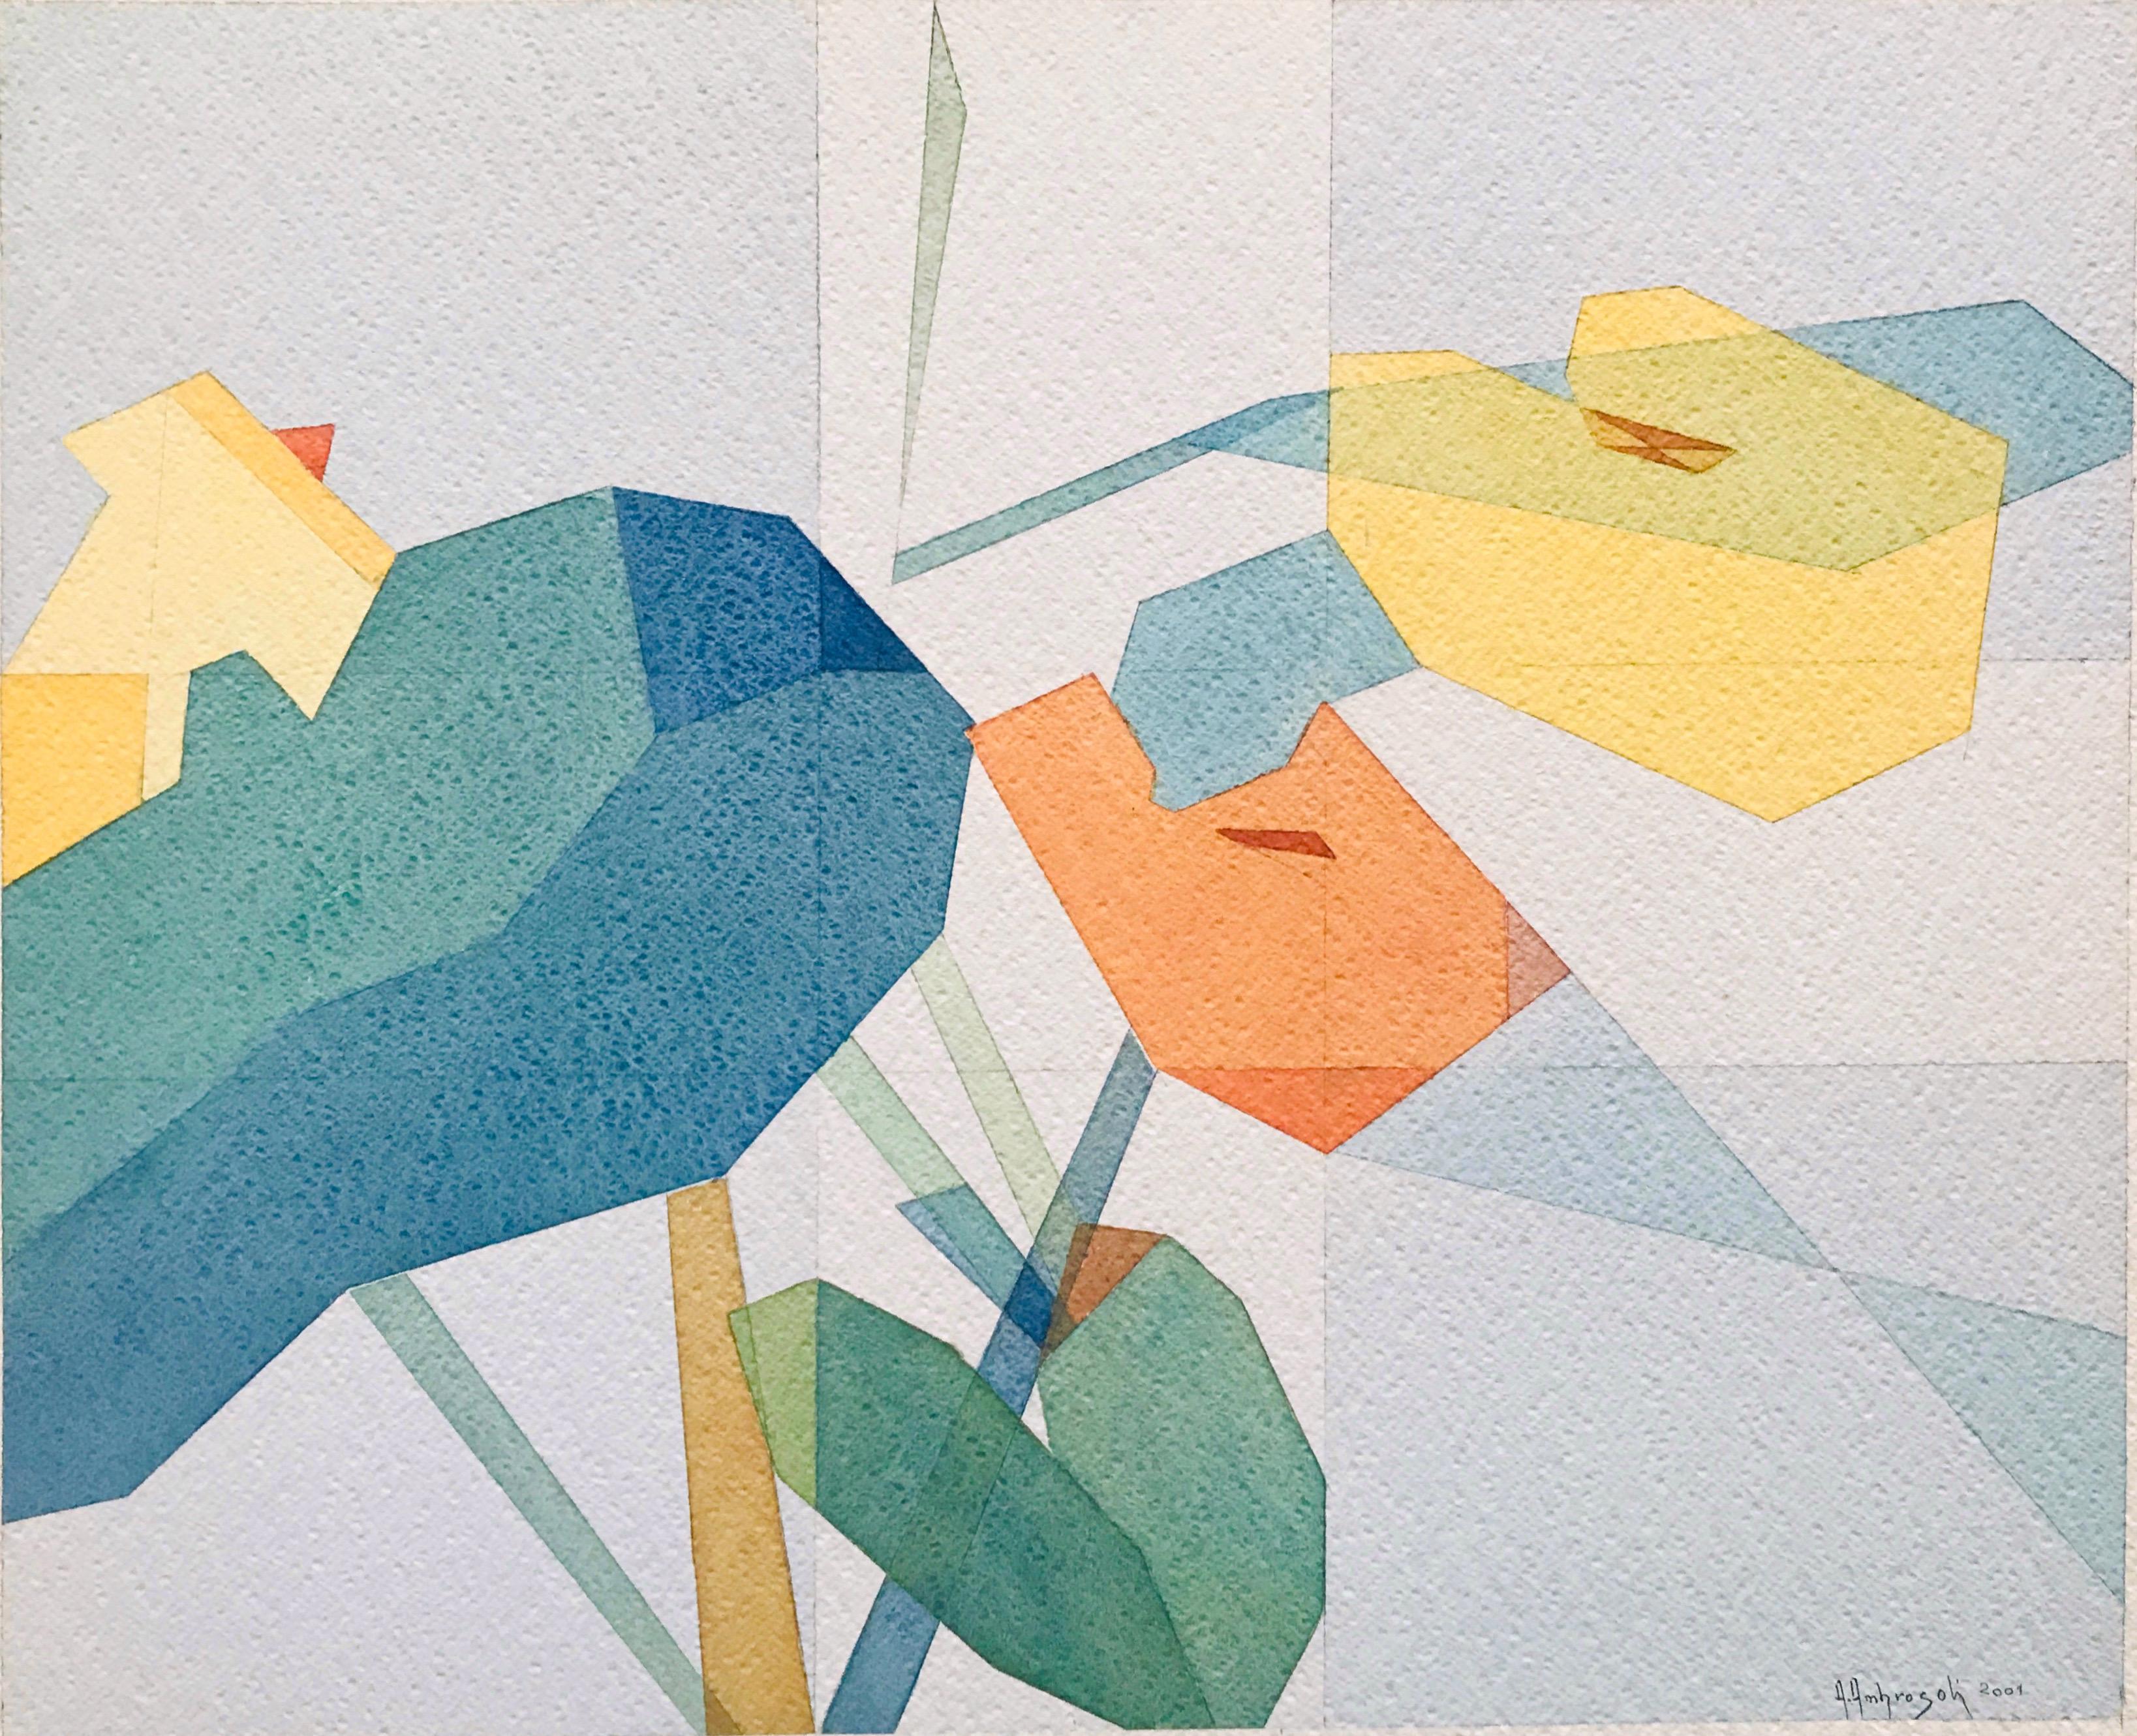 Orange and Yellow by Annemarie Ambrosoli, watercolor, abstract geometric